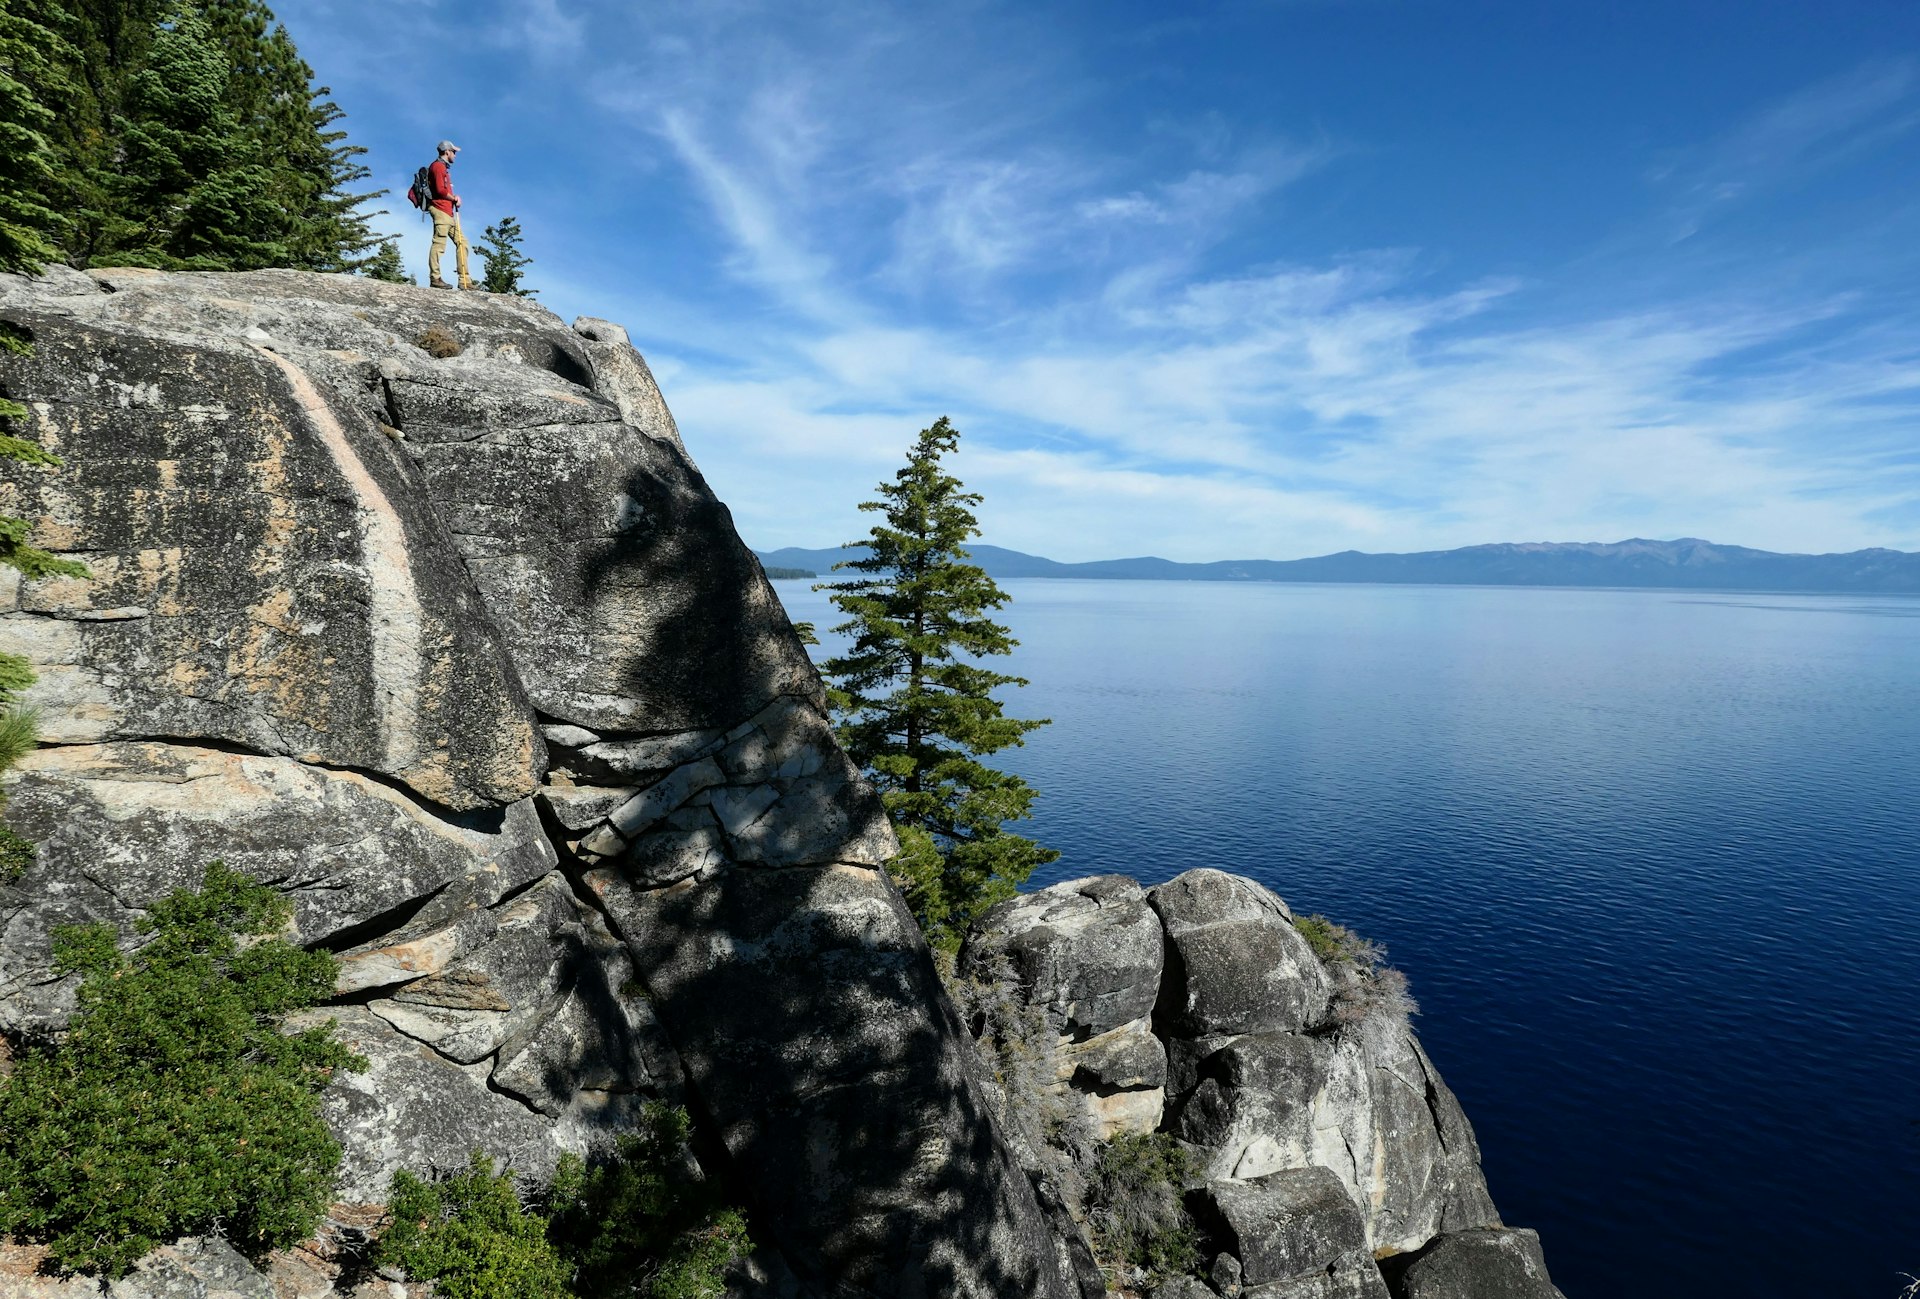 A hiker stands on a rock looking out over beautiful lakeside scenery